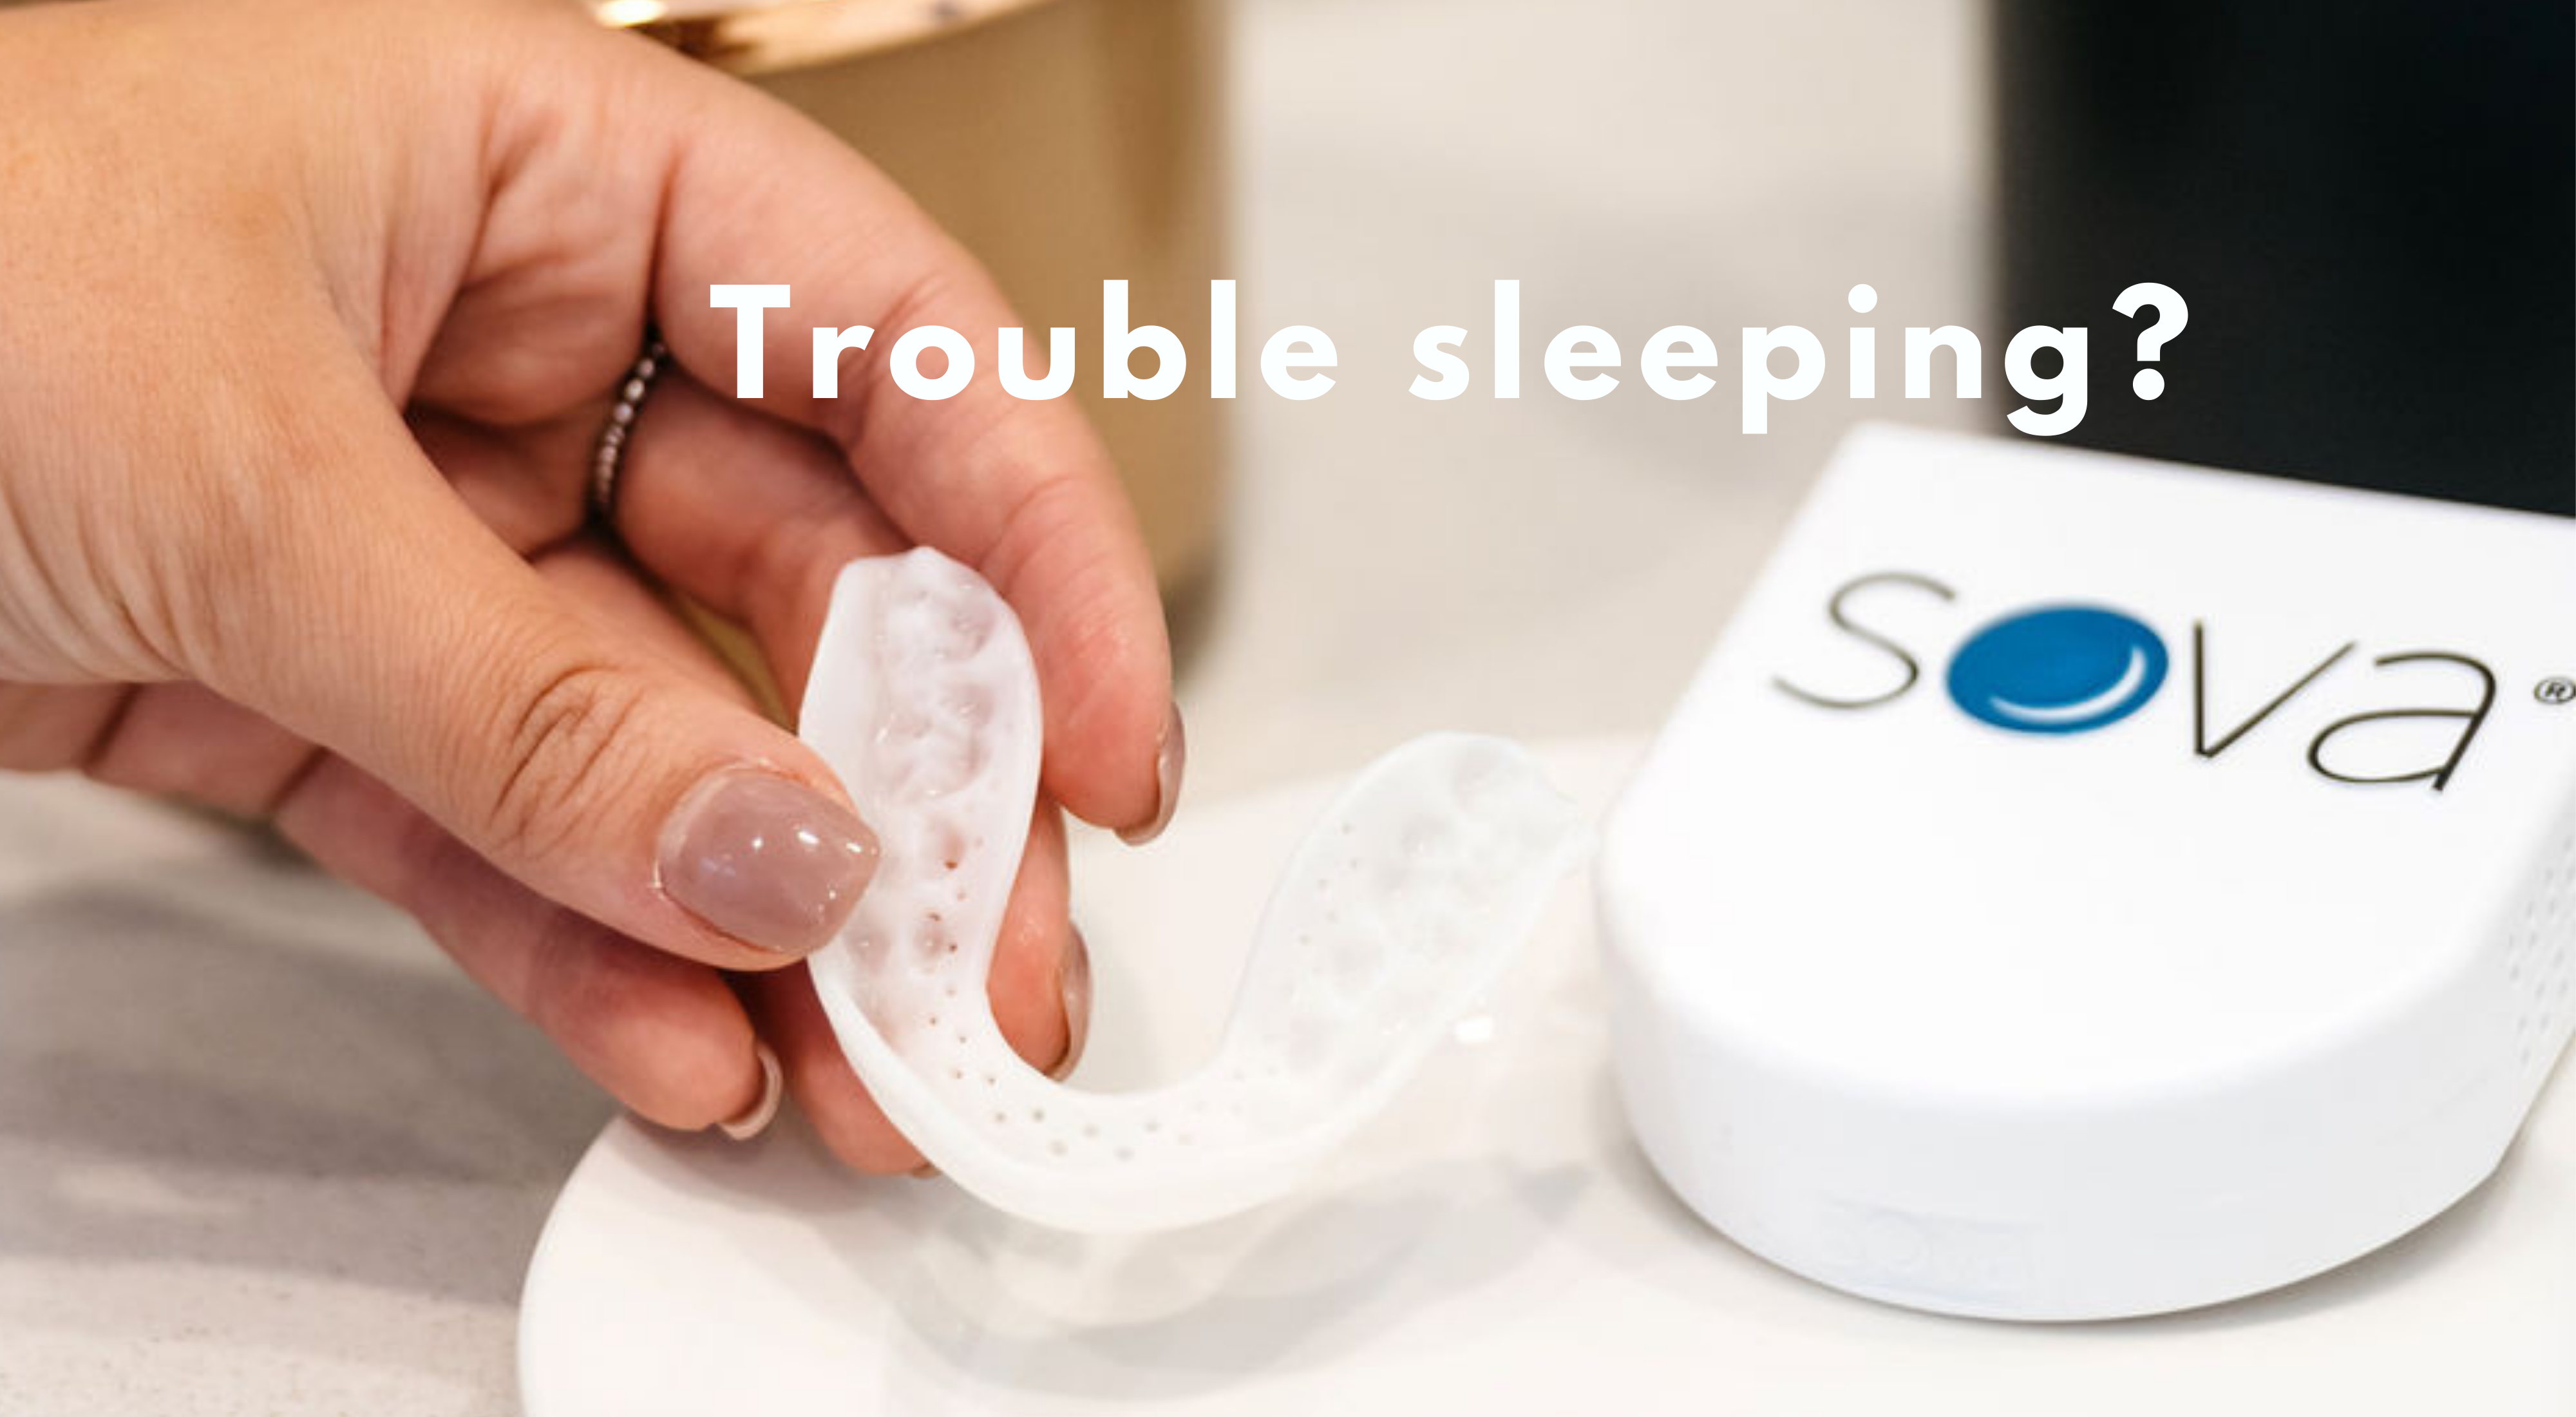 Teeth Grinding: The SOVA Night Guard Is The Solution